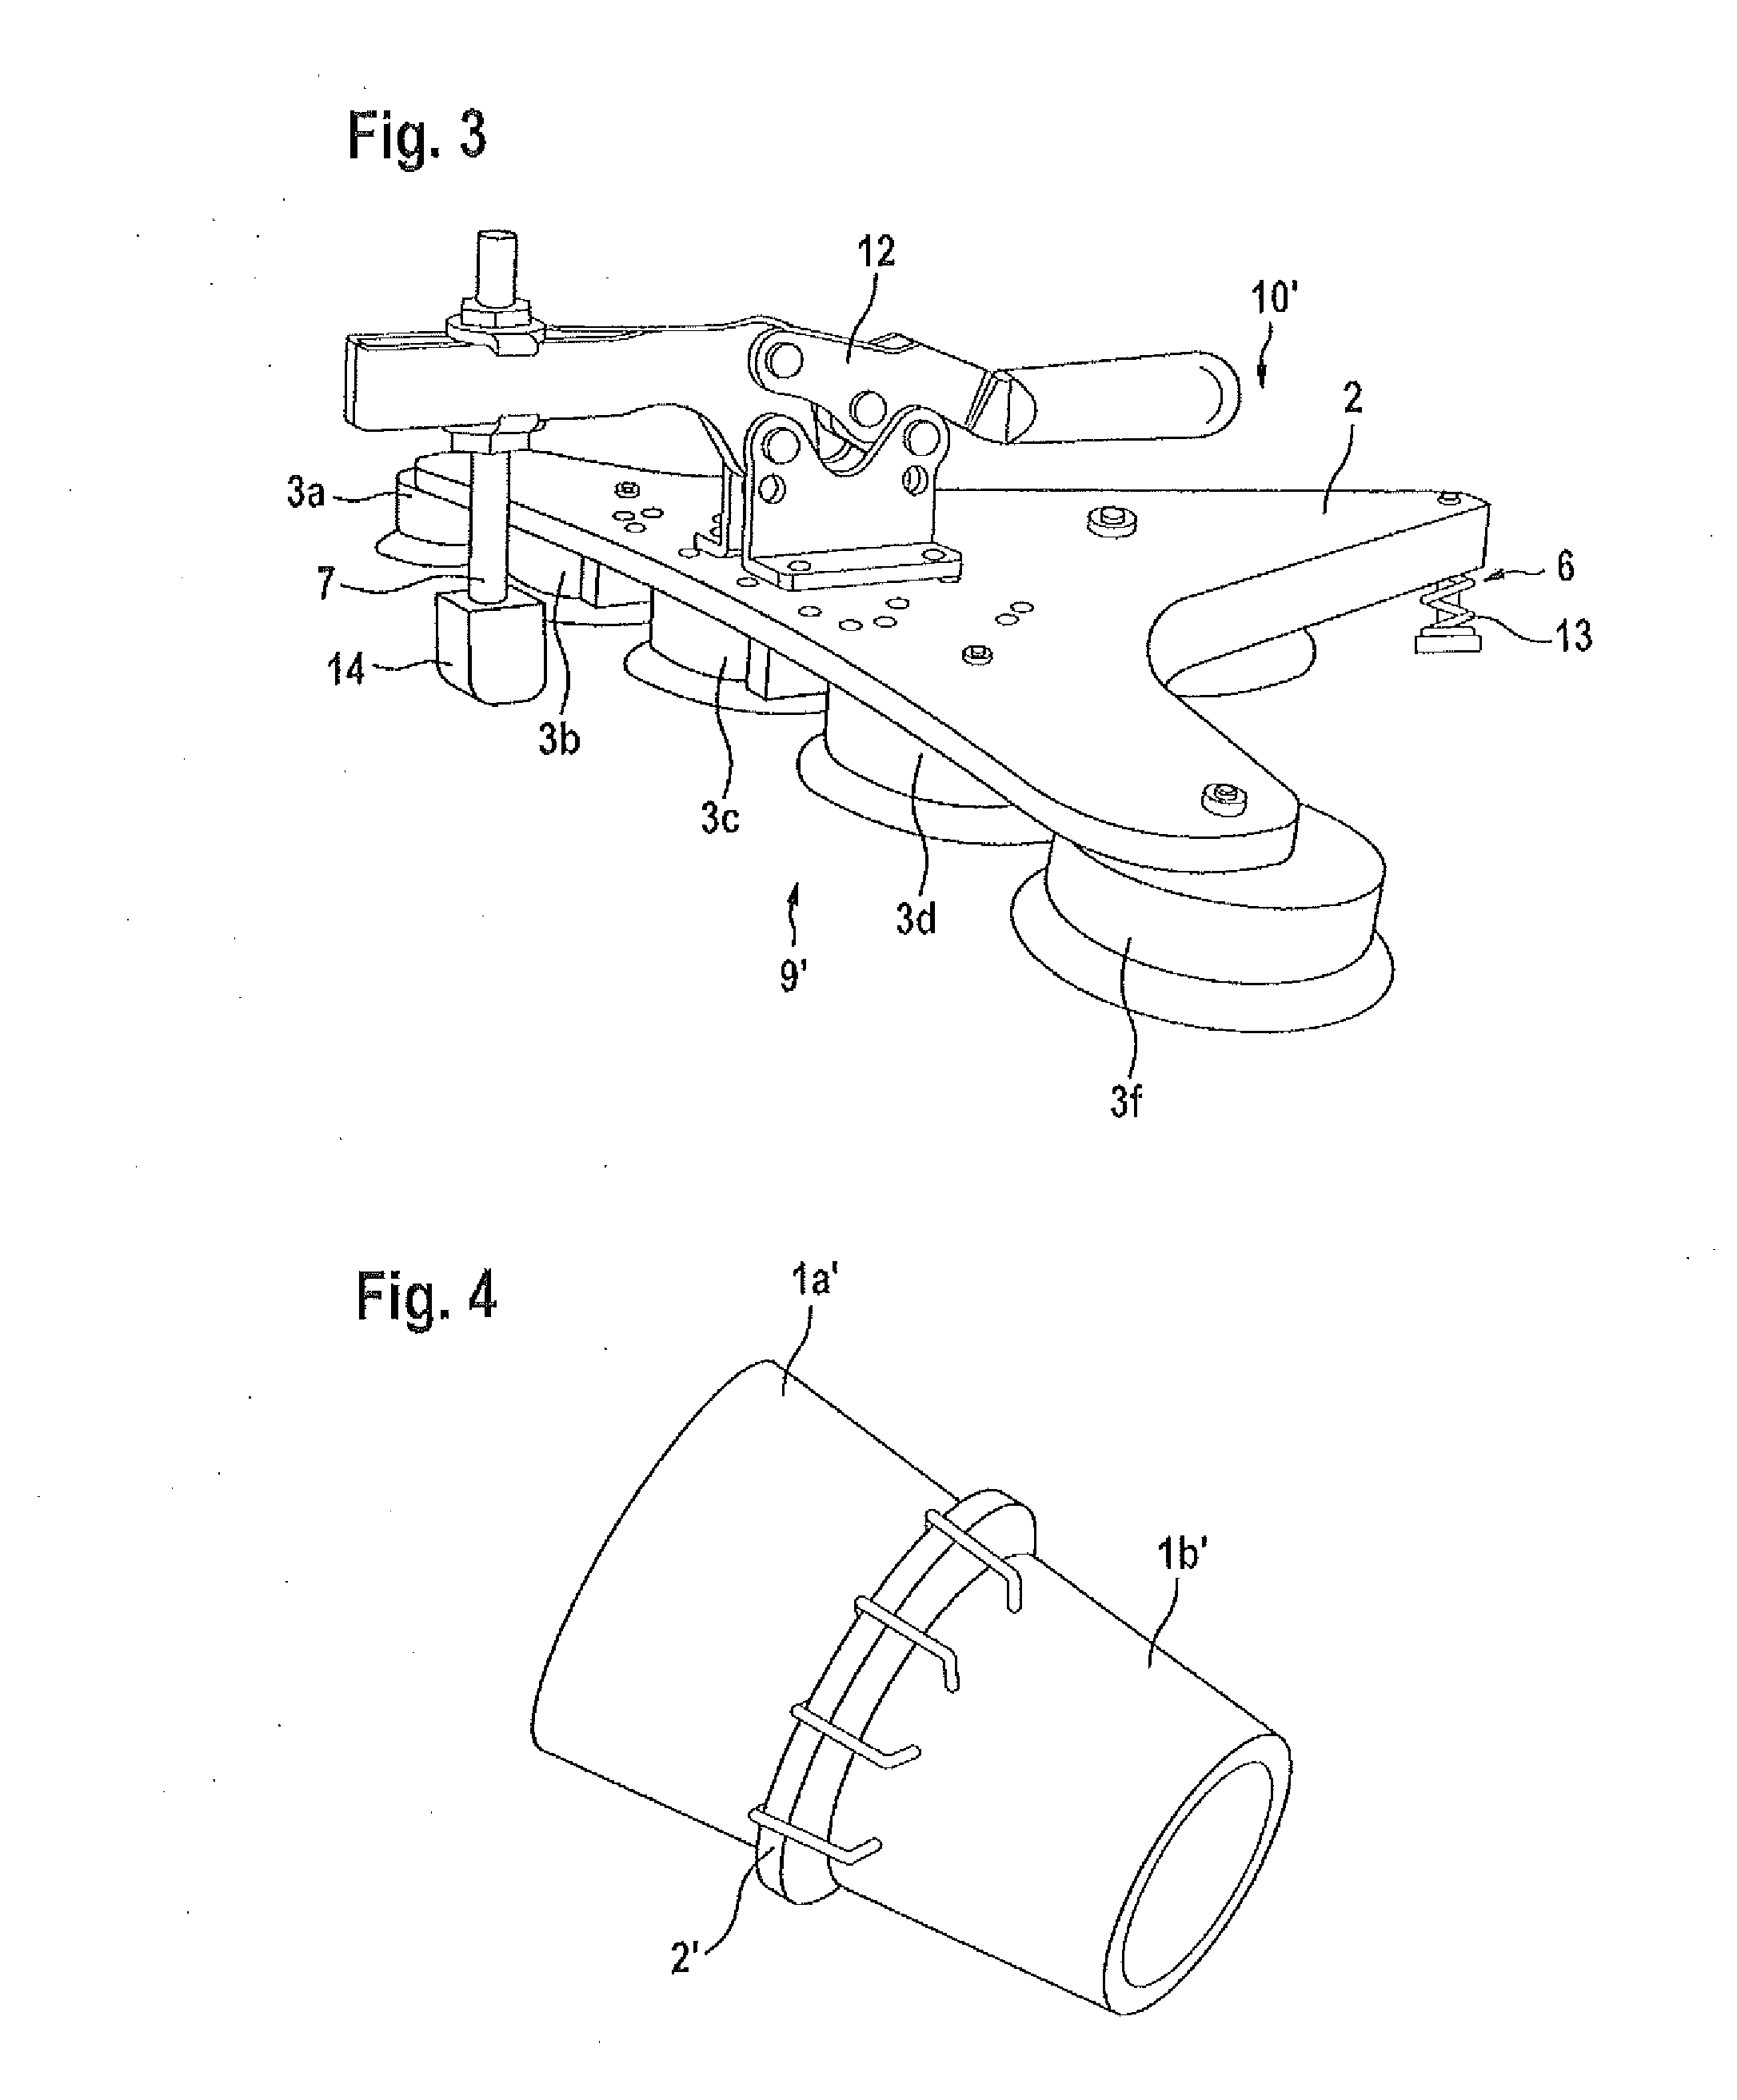 Device for the temporary position fixing of aircraft structures to be interconnected